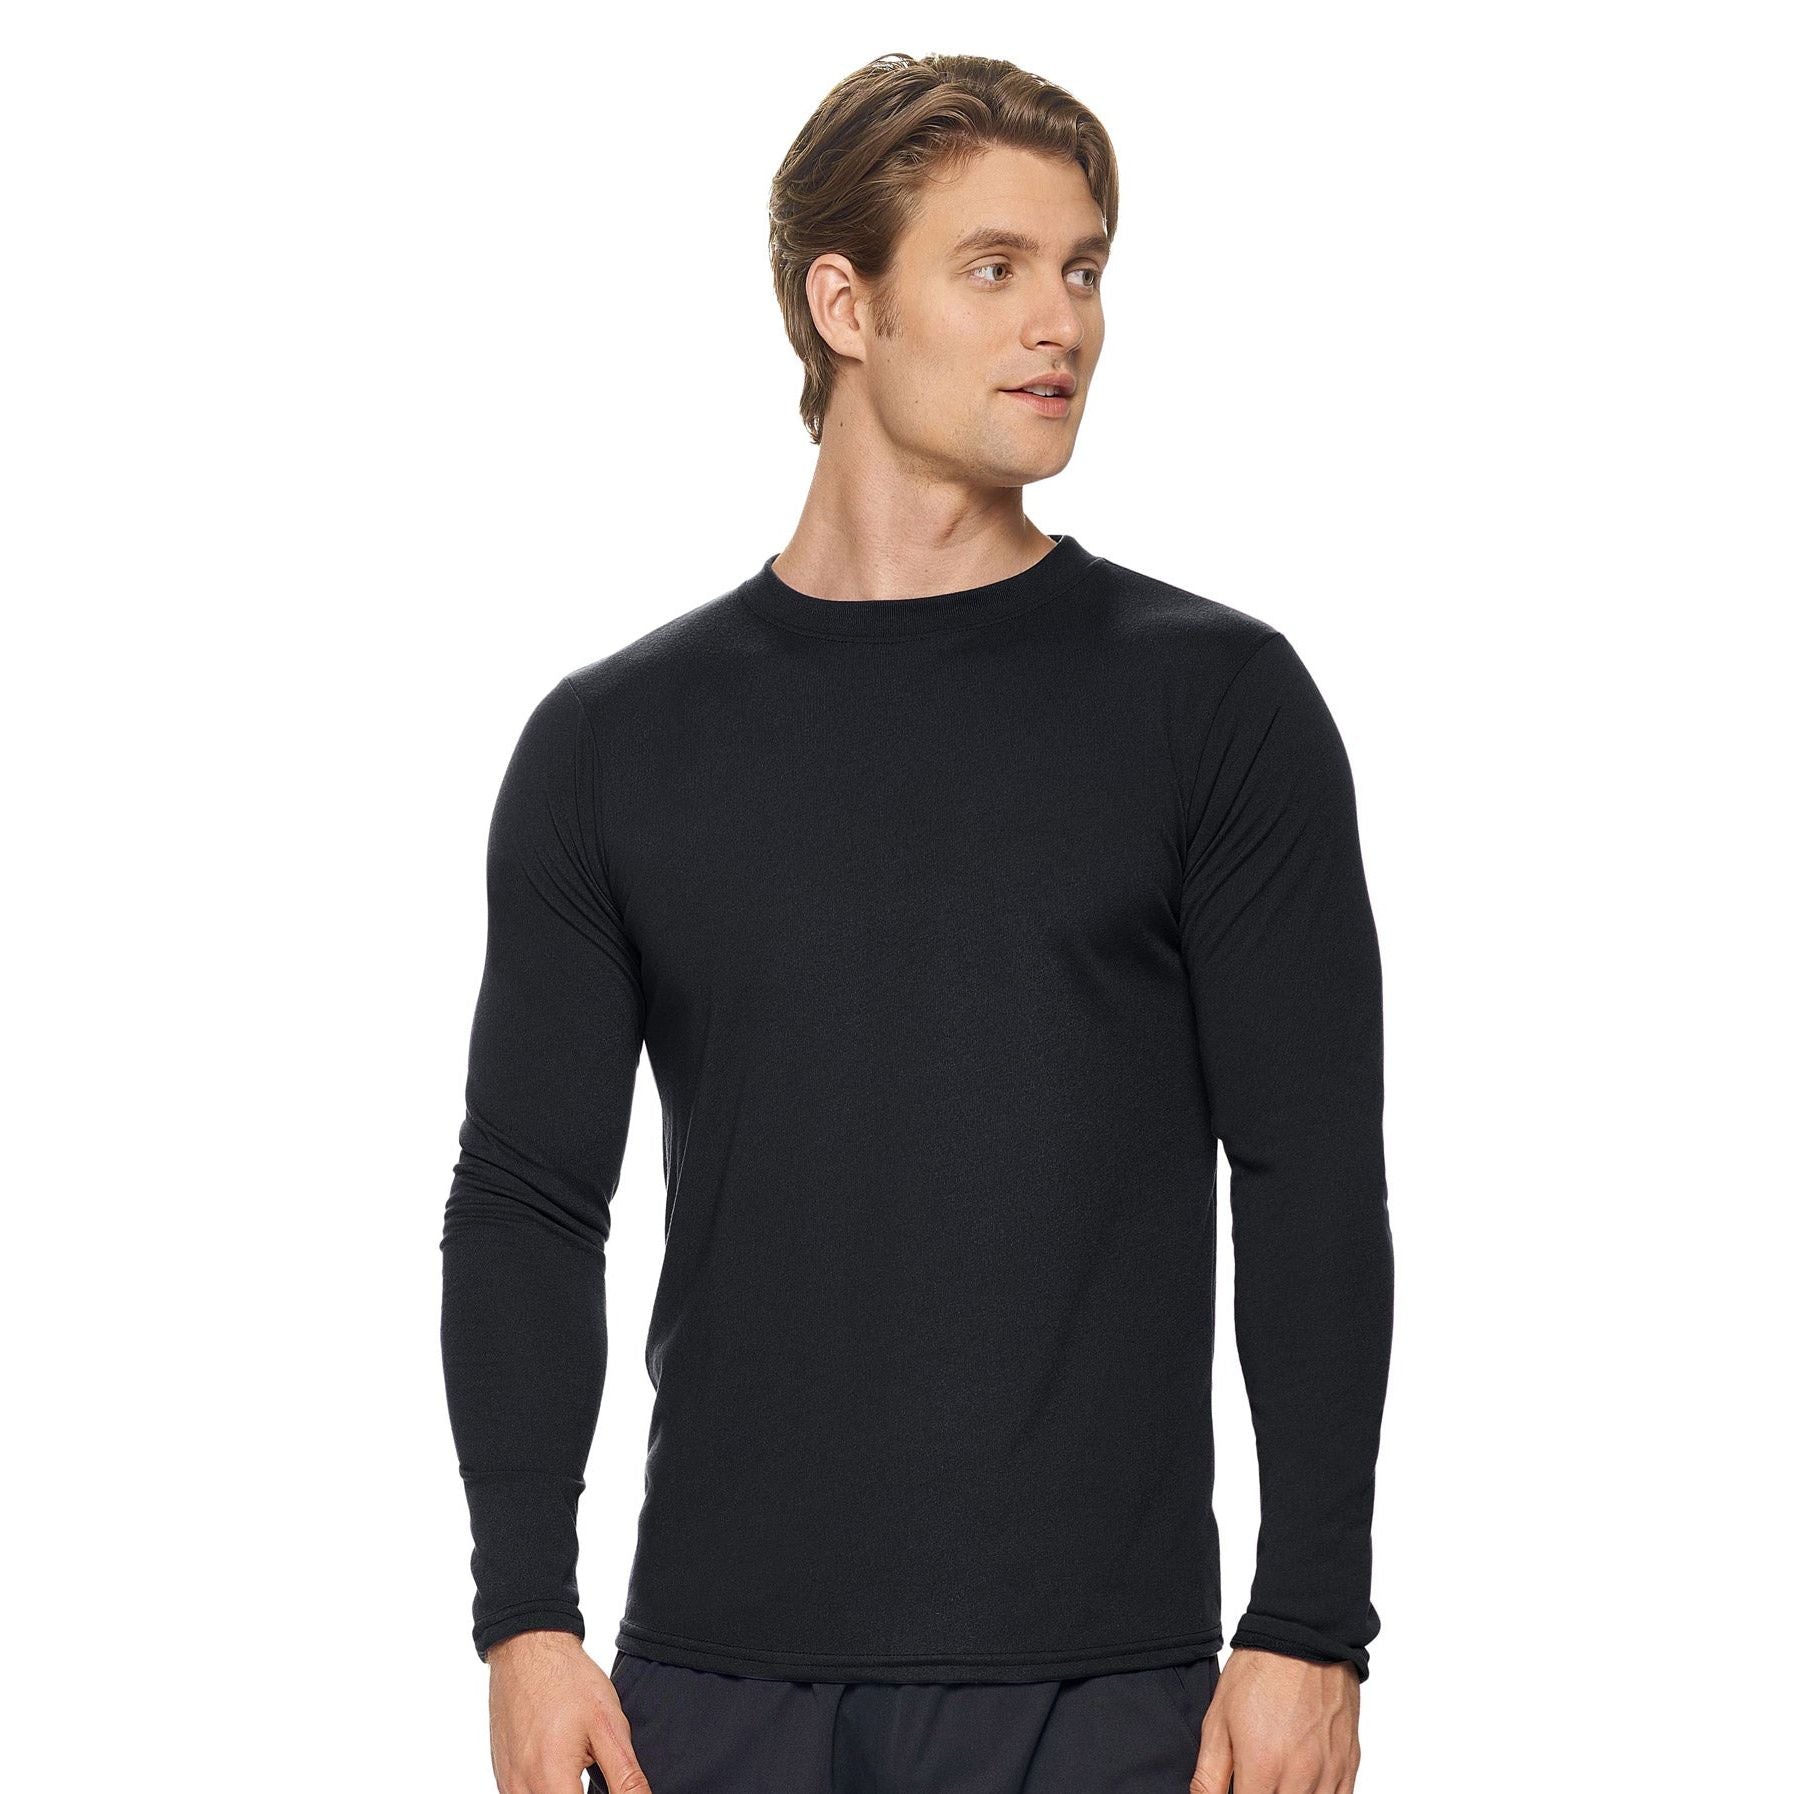 Men's Long Sleeve T-shirts - In the Field us - KME means the very best